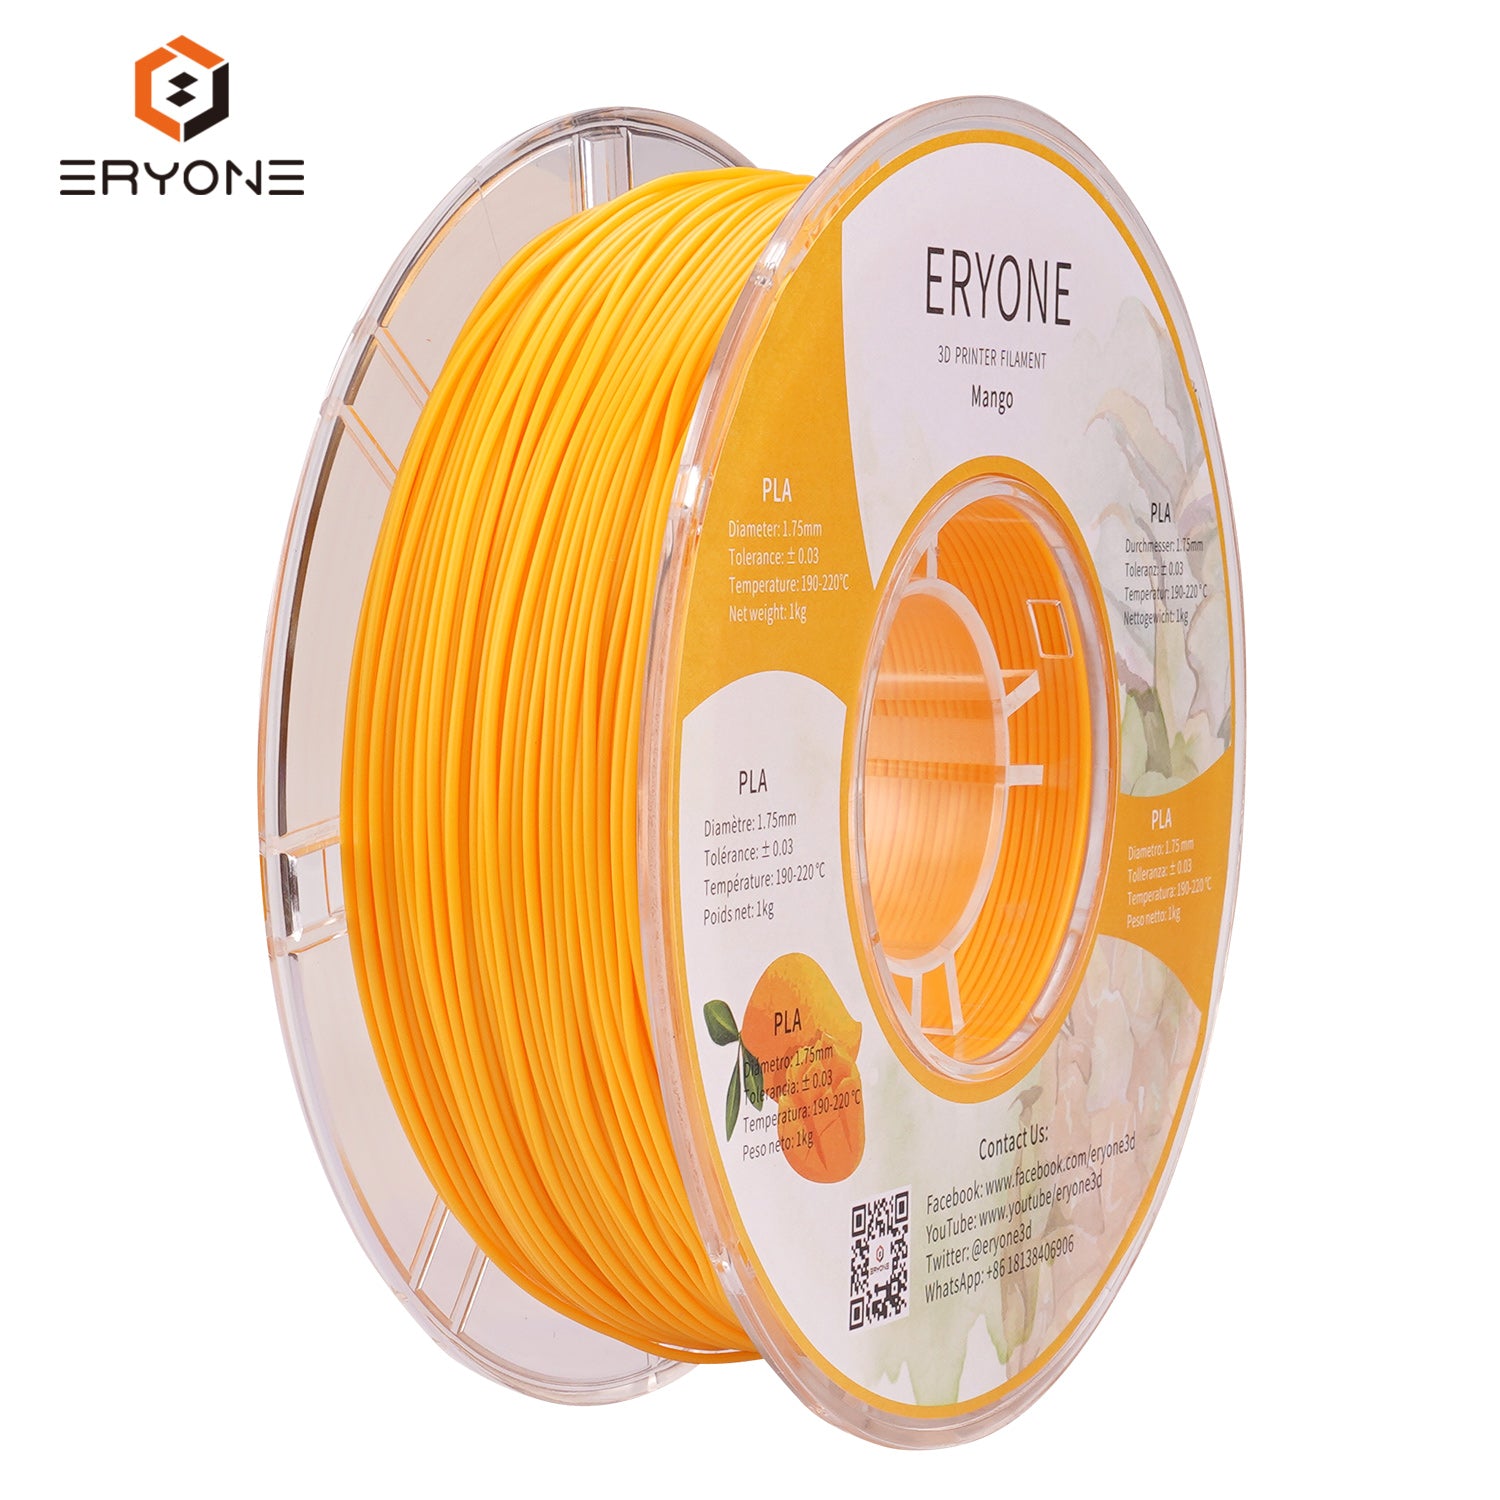 ERYONE All Series products 3D Printing 1kg +FREE SHIPPING(MOQ:5 rolls,can mix color)